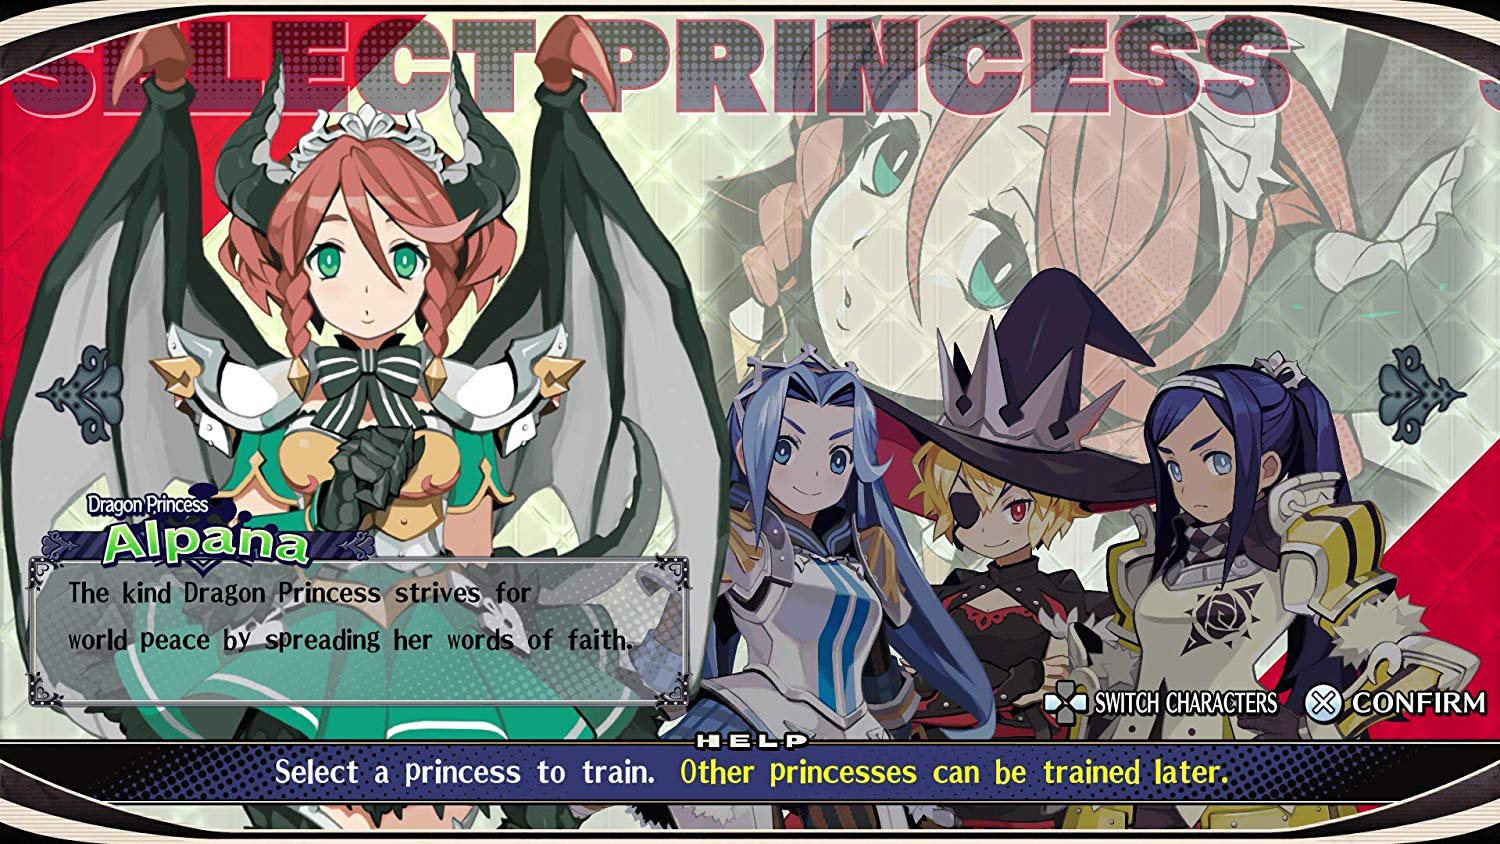 The Princess Guide Western Release Dates Set for March 2019